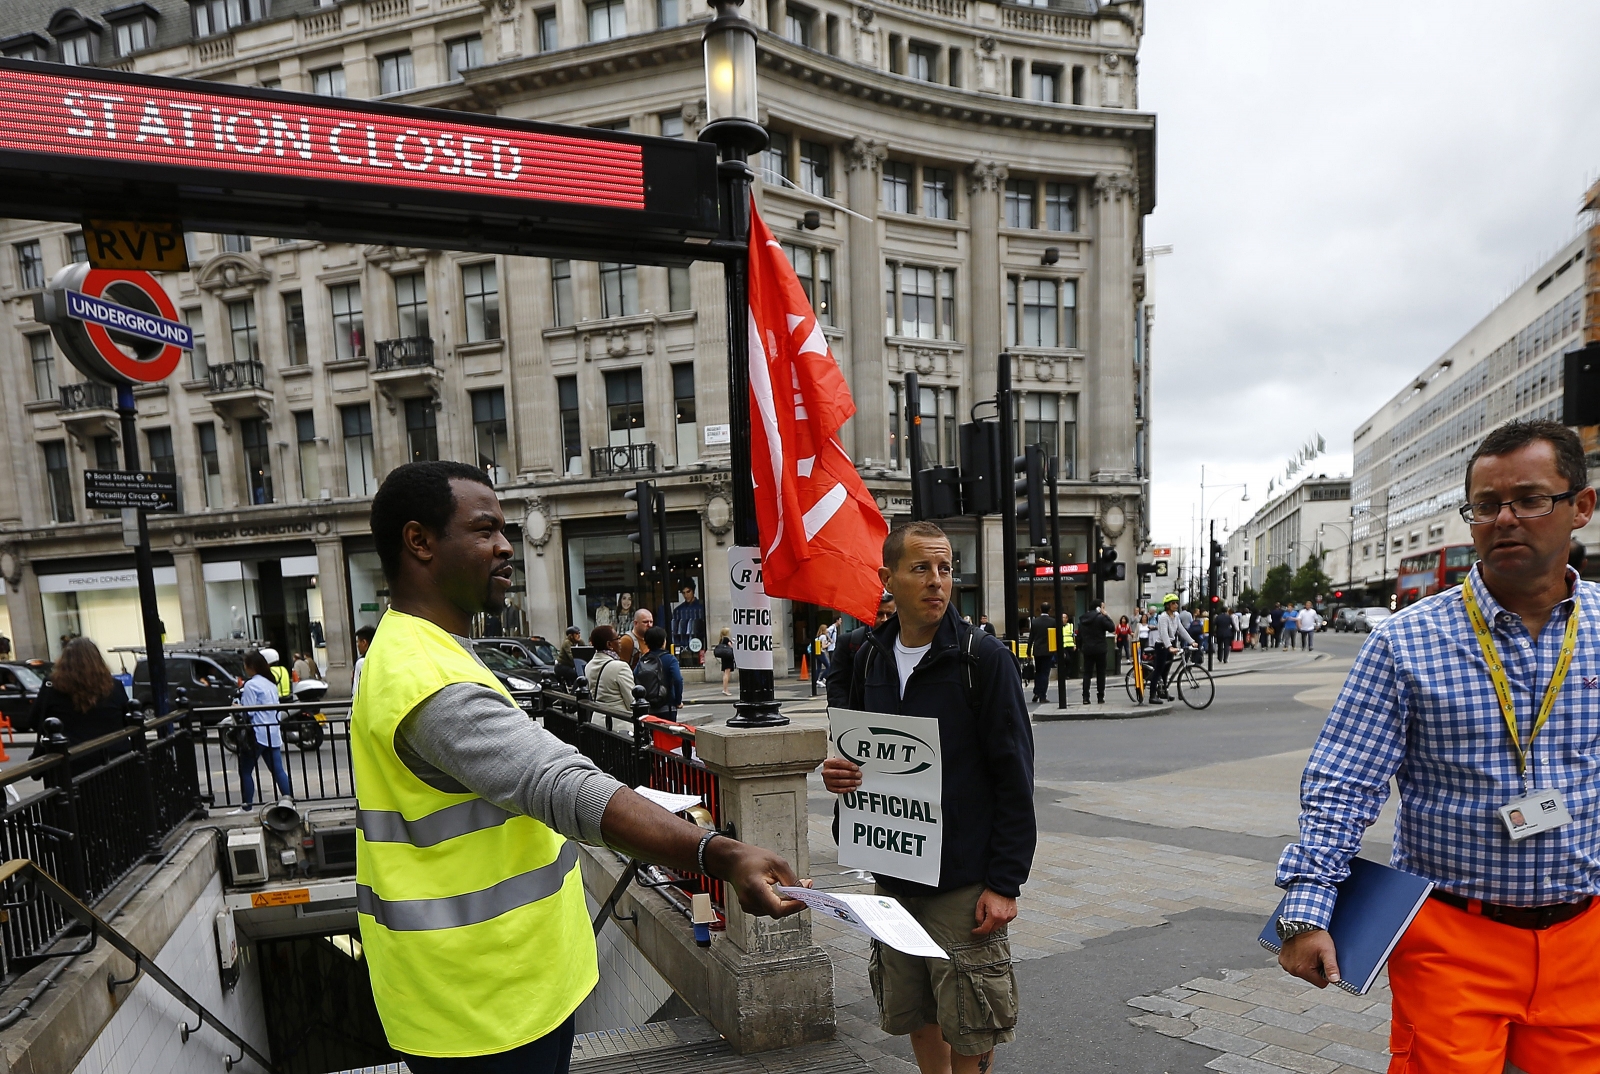 London Tube strike Why can't we sack striking transport workers?